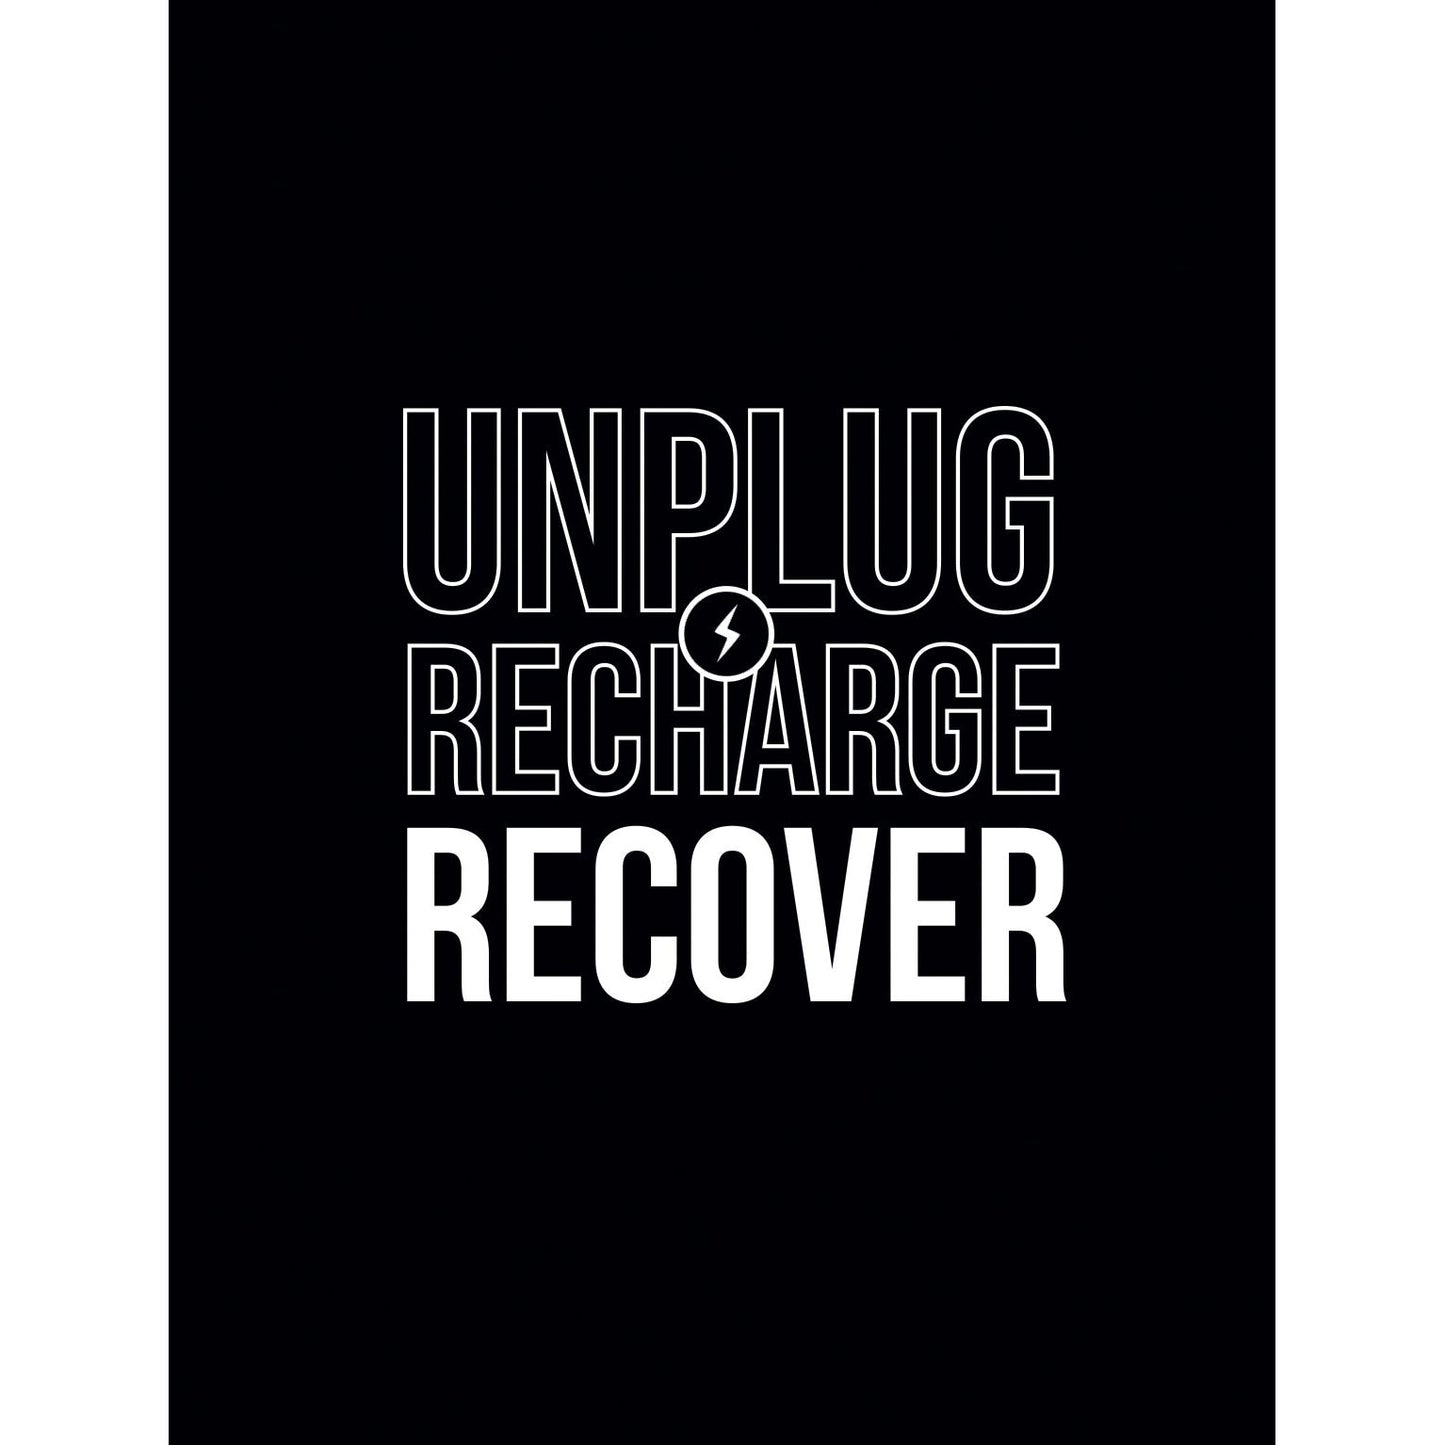 Get Well - Unplug Recharge Recover  Card - Gia Graham - Cardmore